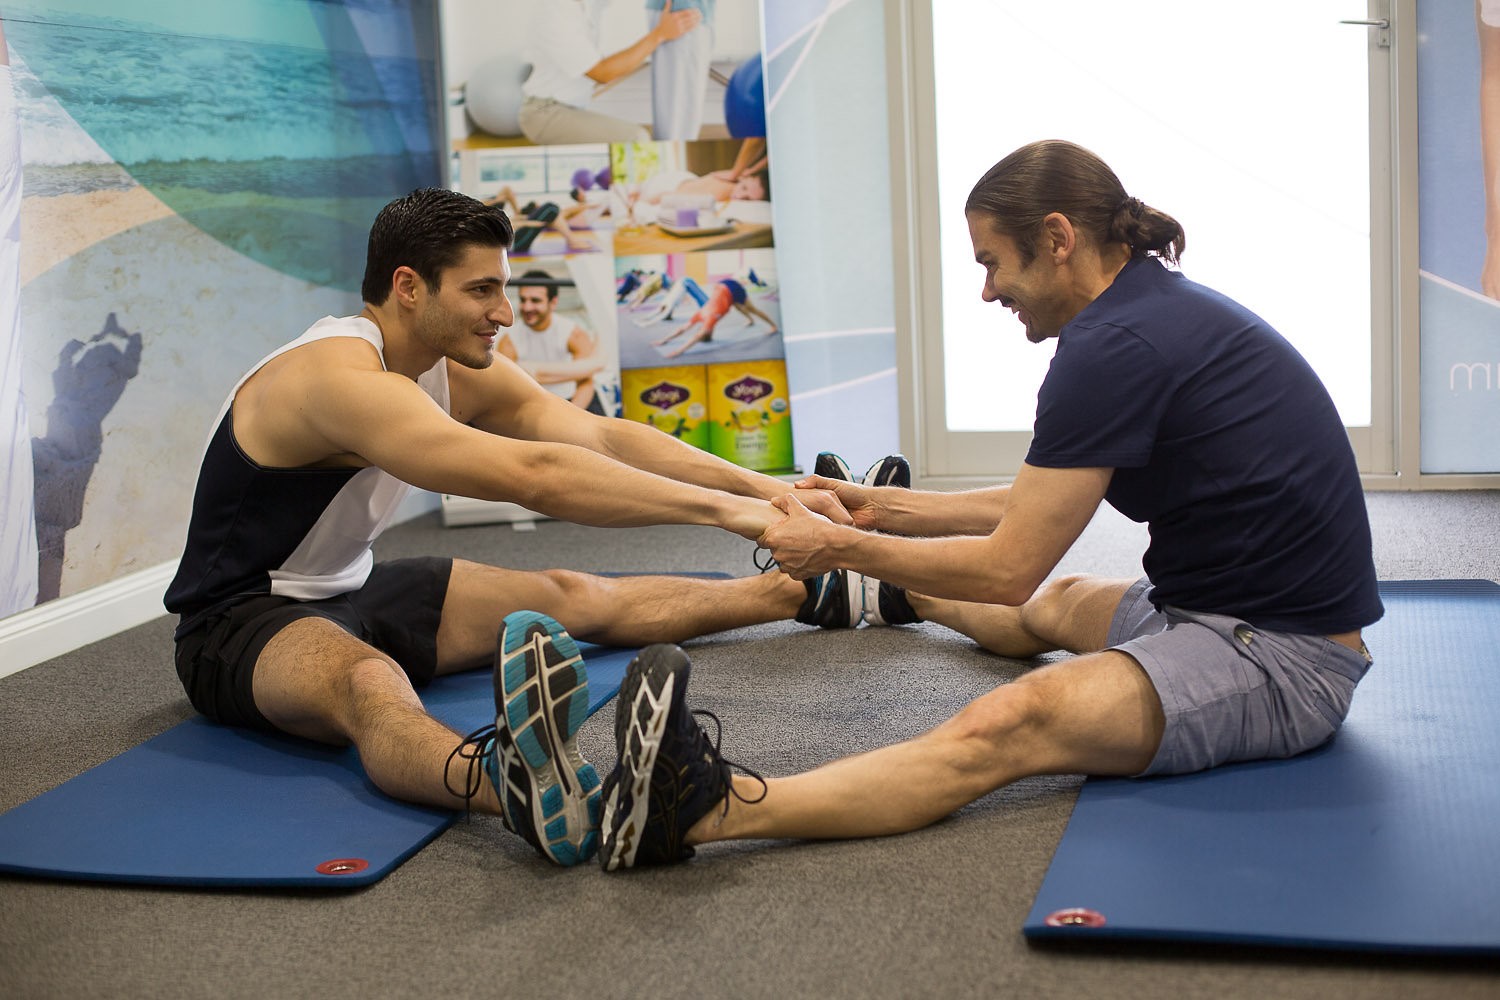 Physiotherapy Enhances Wellness: Live A Pain-Free Life